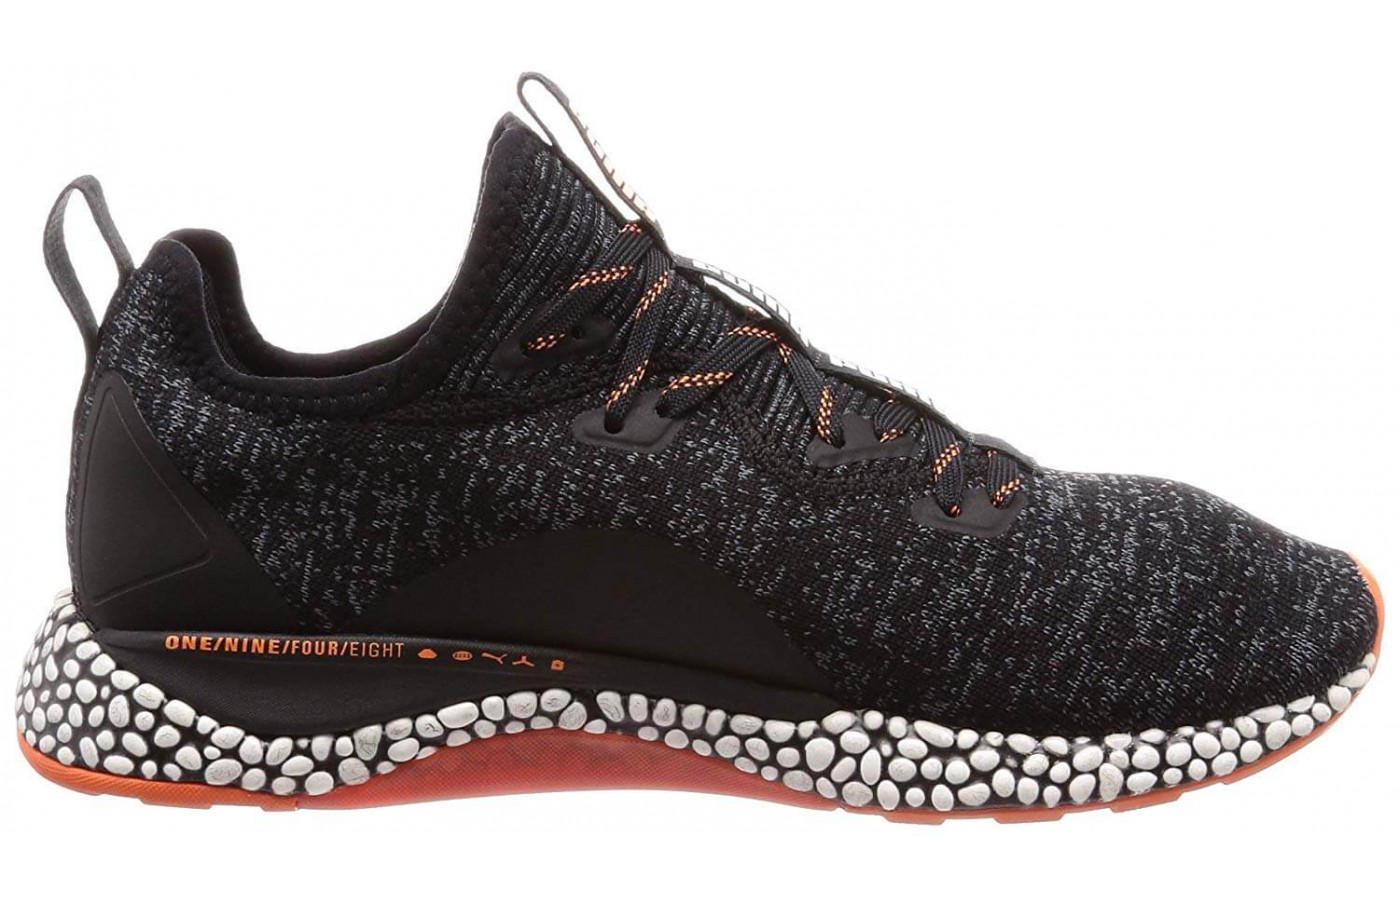 The Hybrid Runner's HYBRID midsole combines IGNITE foam with NRGY beads